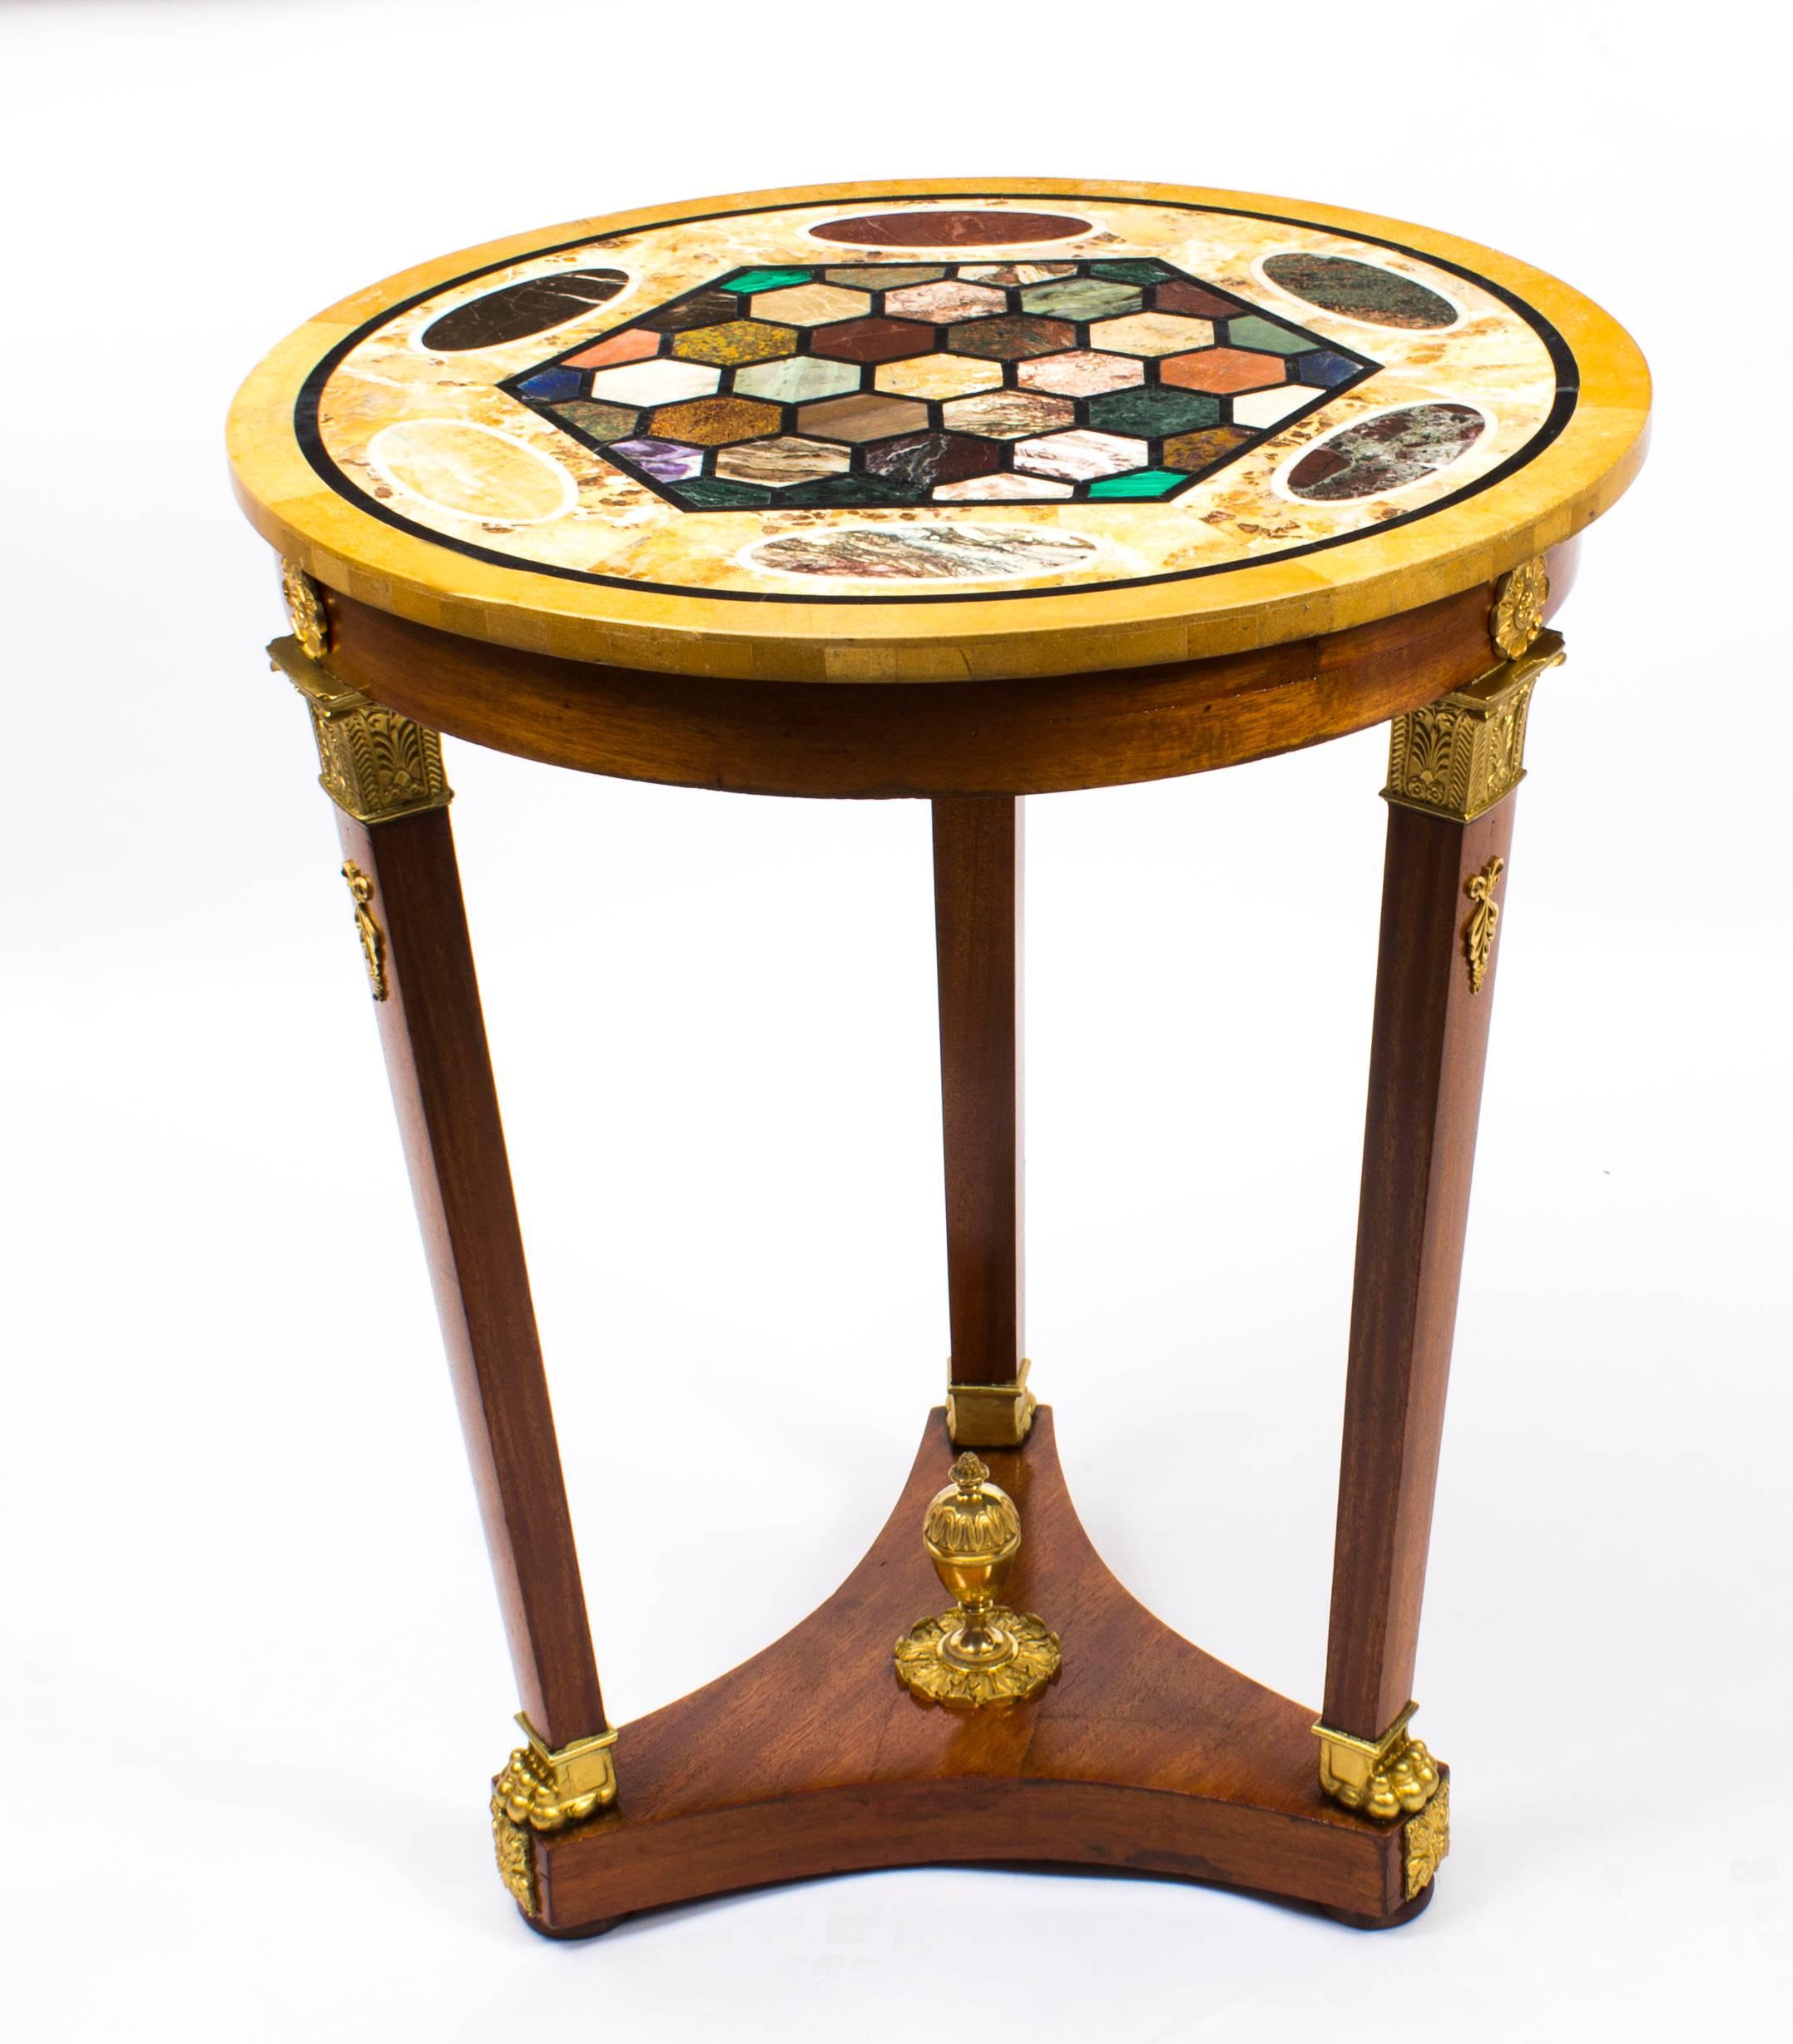 This is a beautiful antique early 20th century French Empire style circular marble top Bouillotte table decorated with gilt bronze mounts.

It is masterfully crafted in blonde mahogany and raised on an elegant triform base centred by a gilt bronze